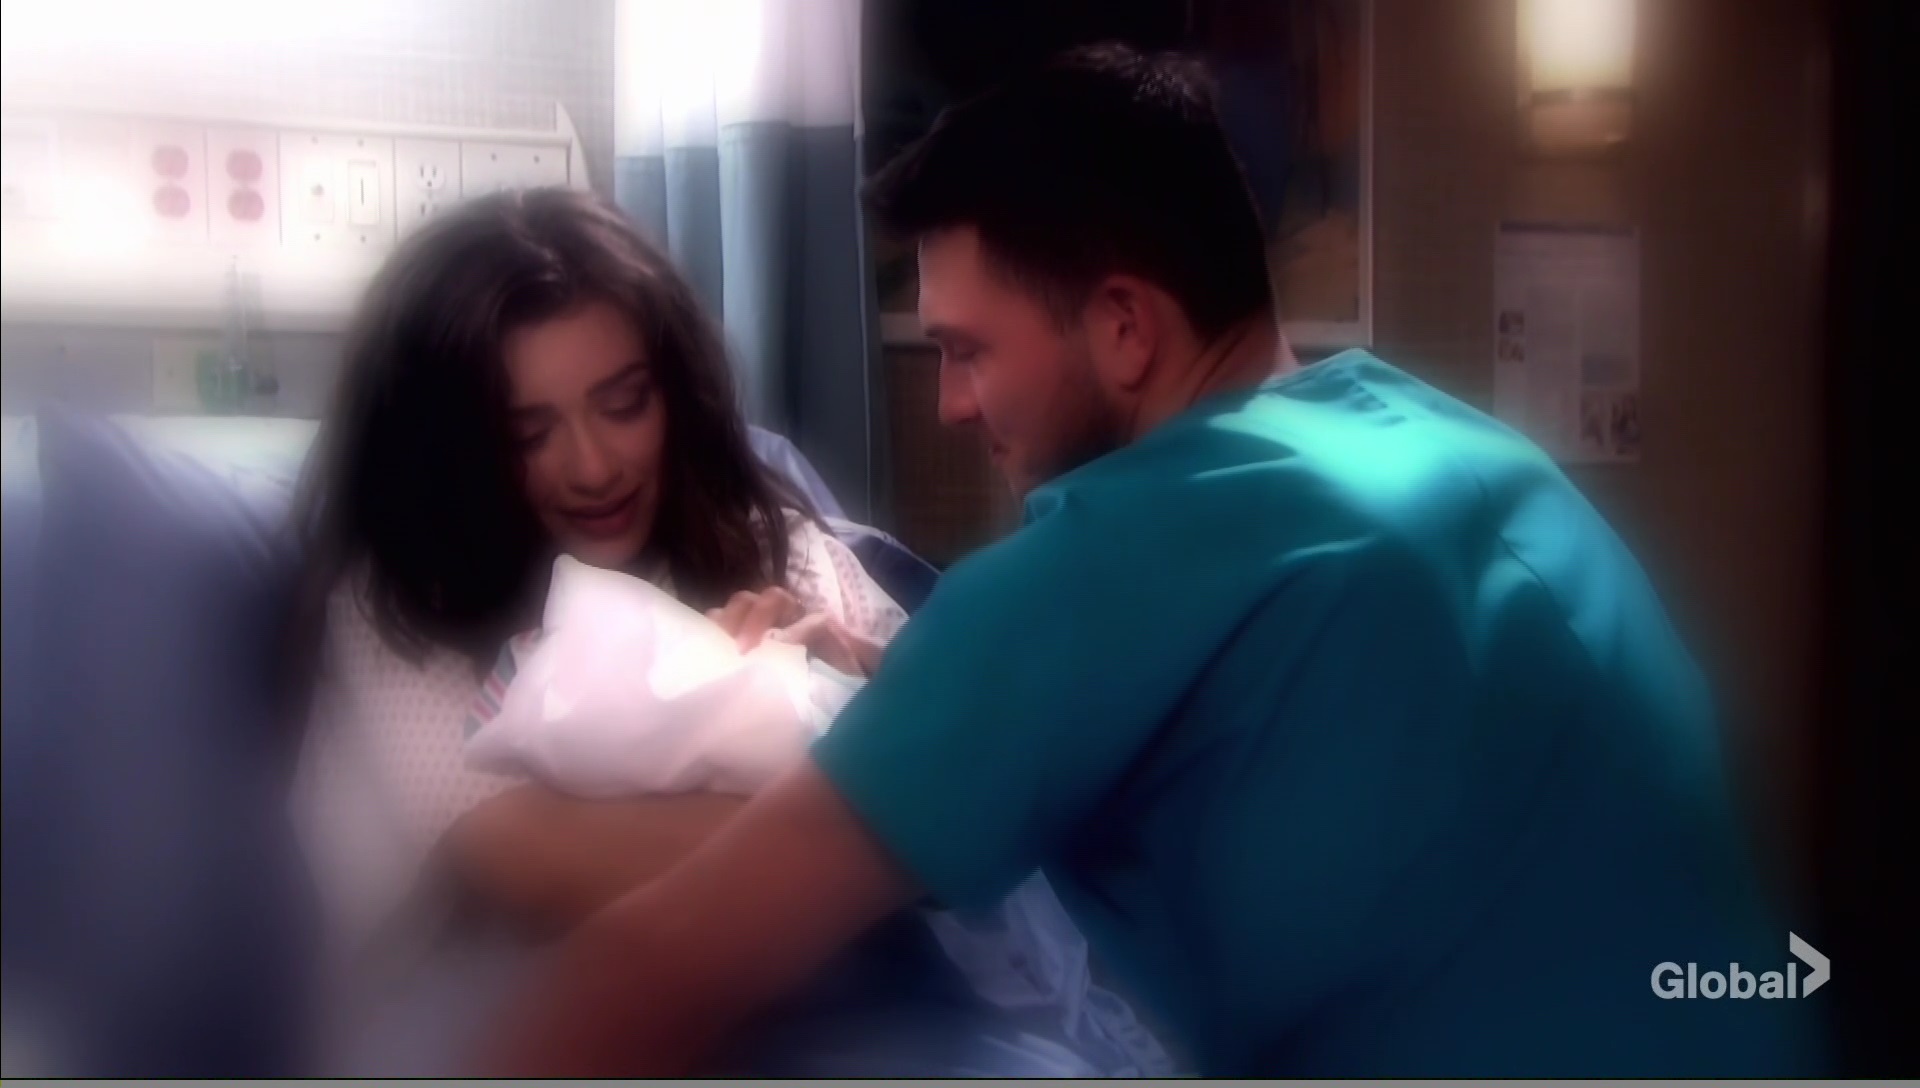 ben and ciara baby fantasy days of our lives